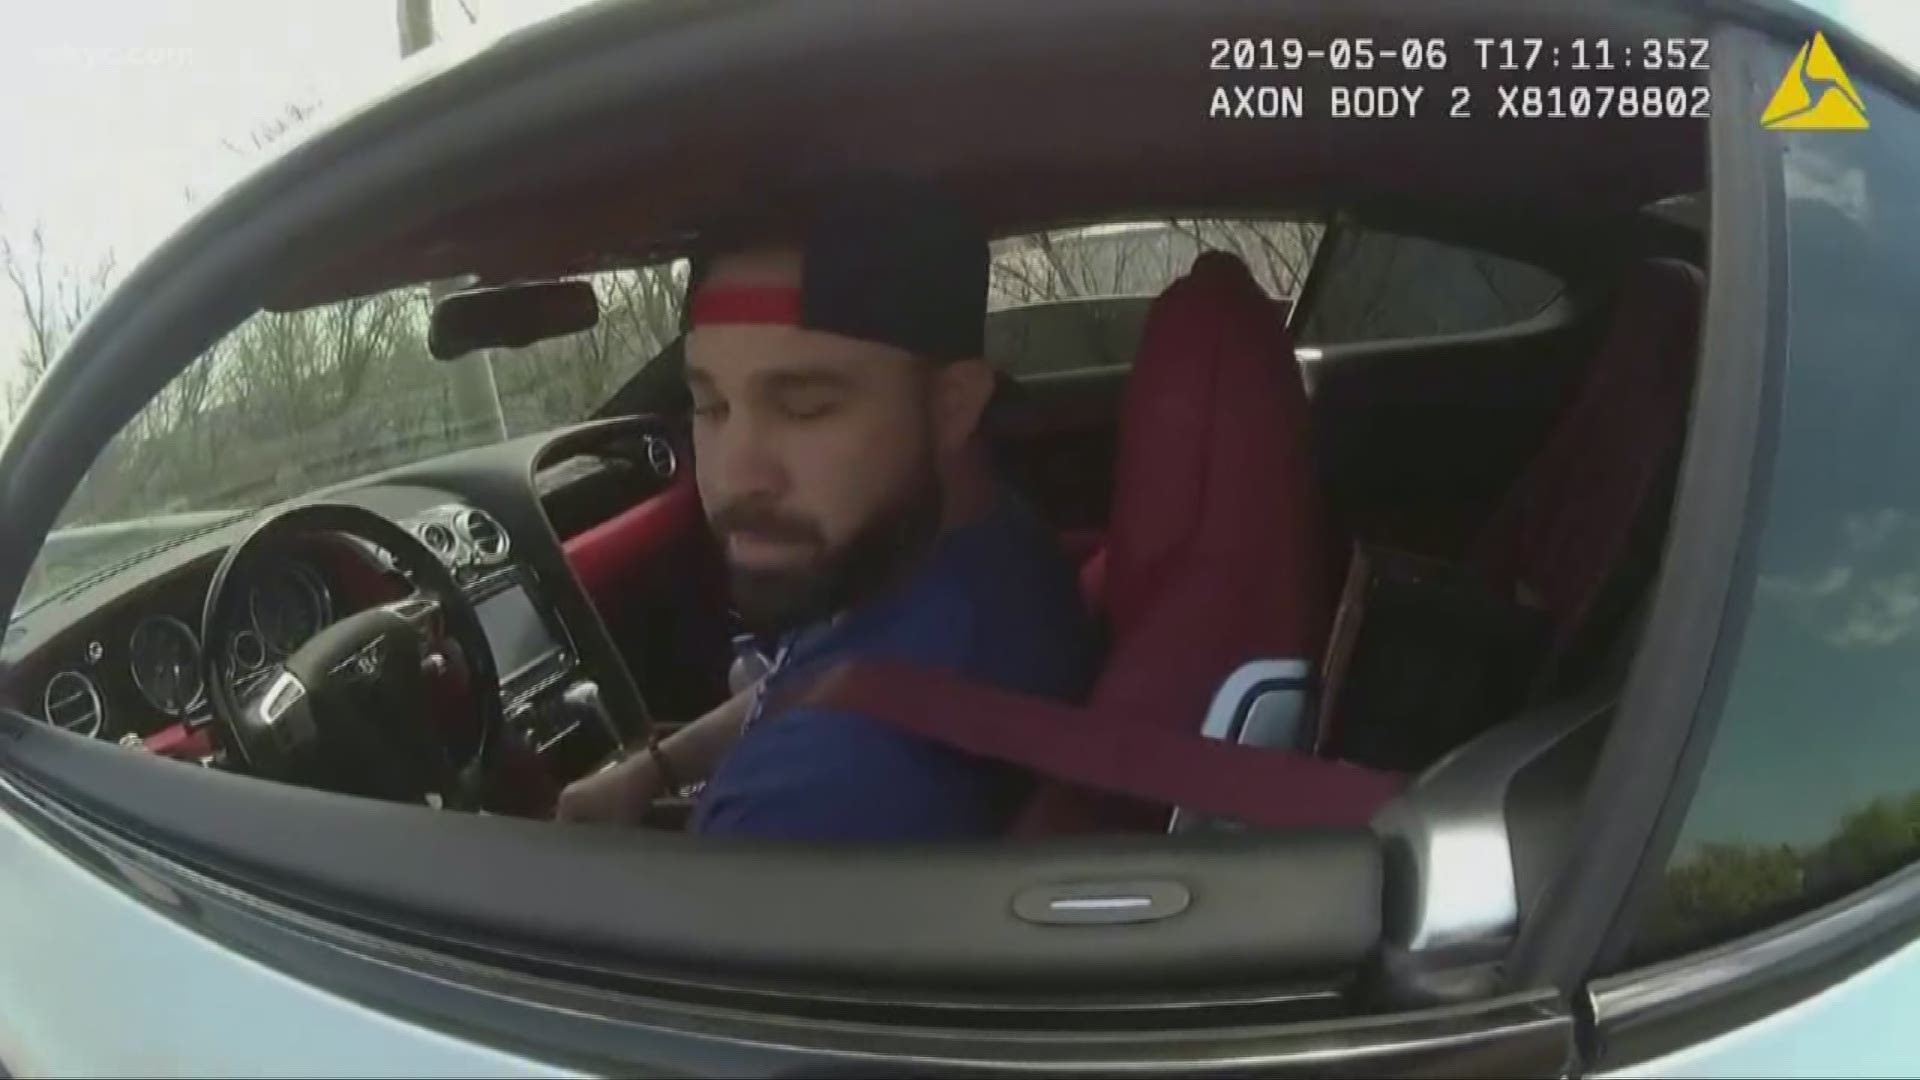 A Cleveland police officer had some advice for Indians second baseman Jason Kipnis during a May 6 traffic stop.